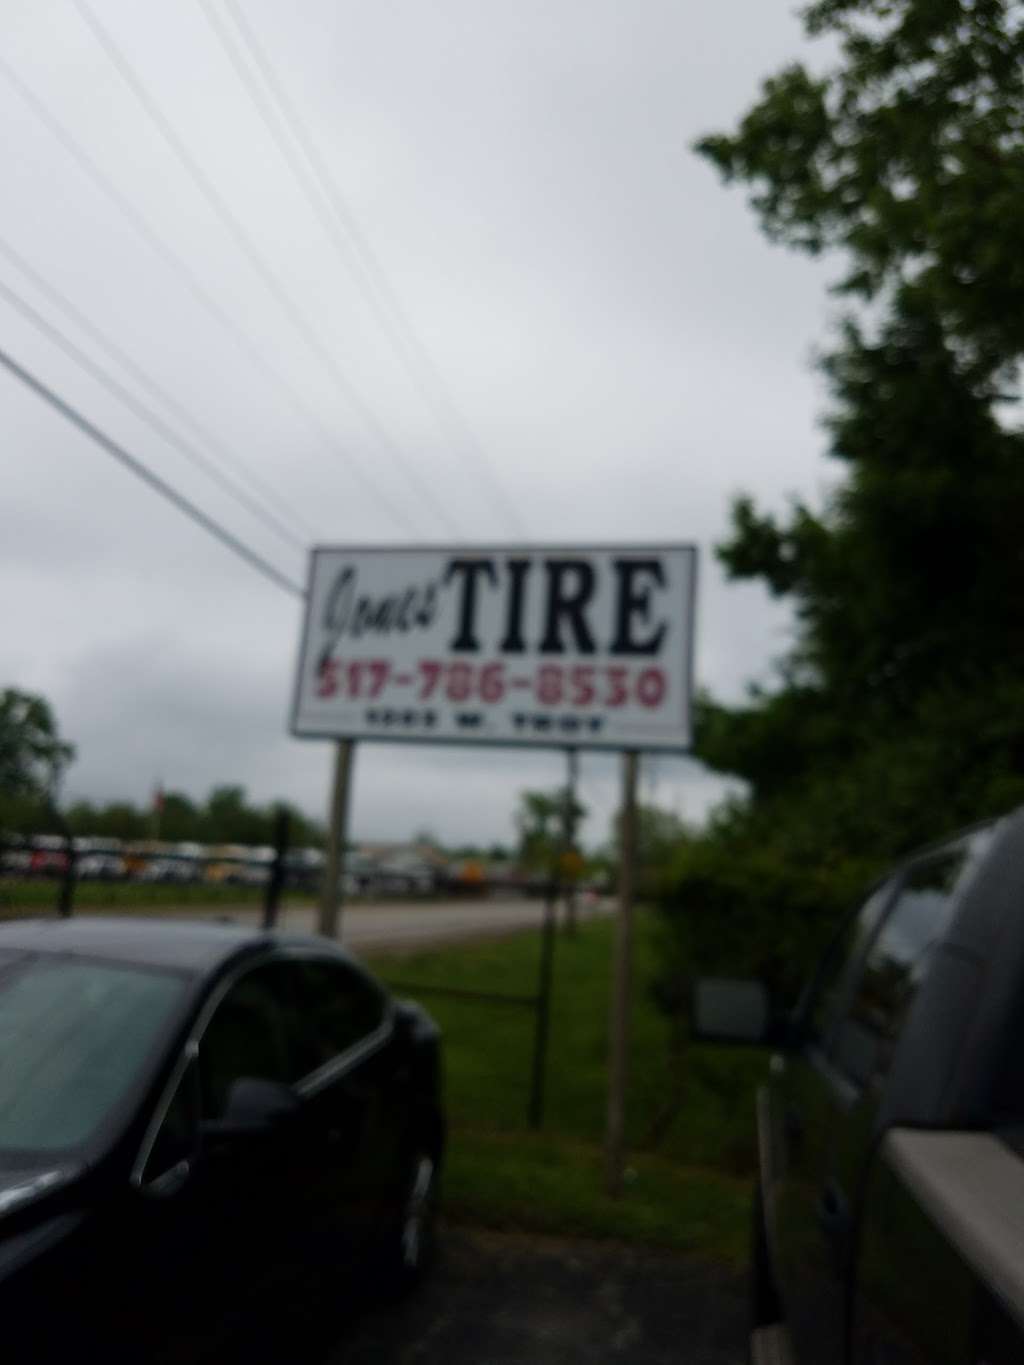 Jones Tire Inc | 1203 W Troy Ave, Indianapolis, IN 46225 | Phone: (317) 786-8530